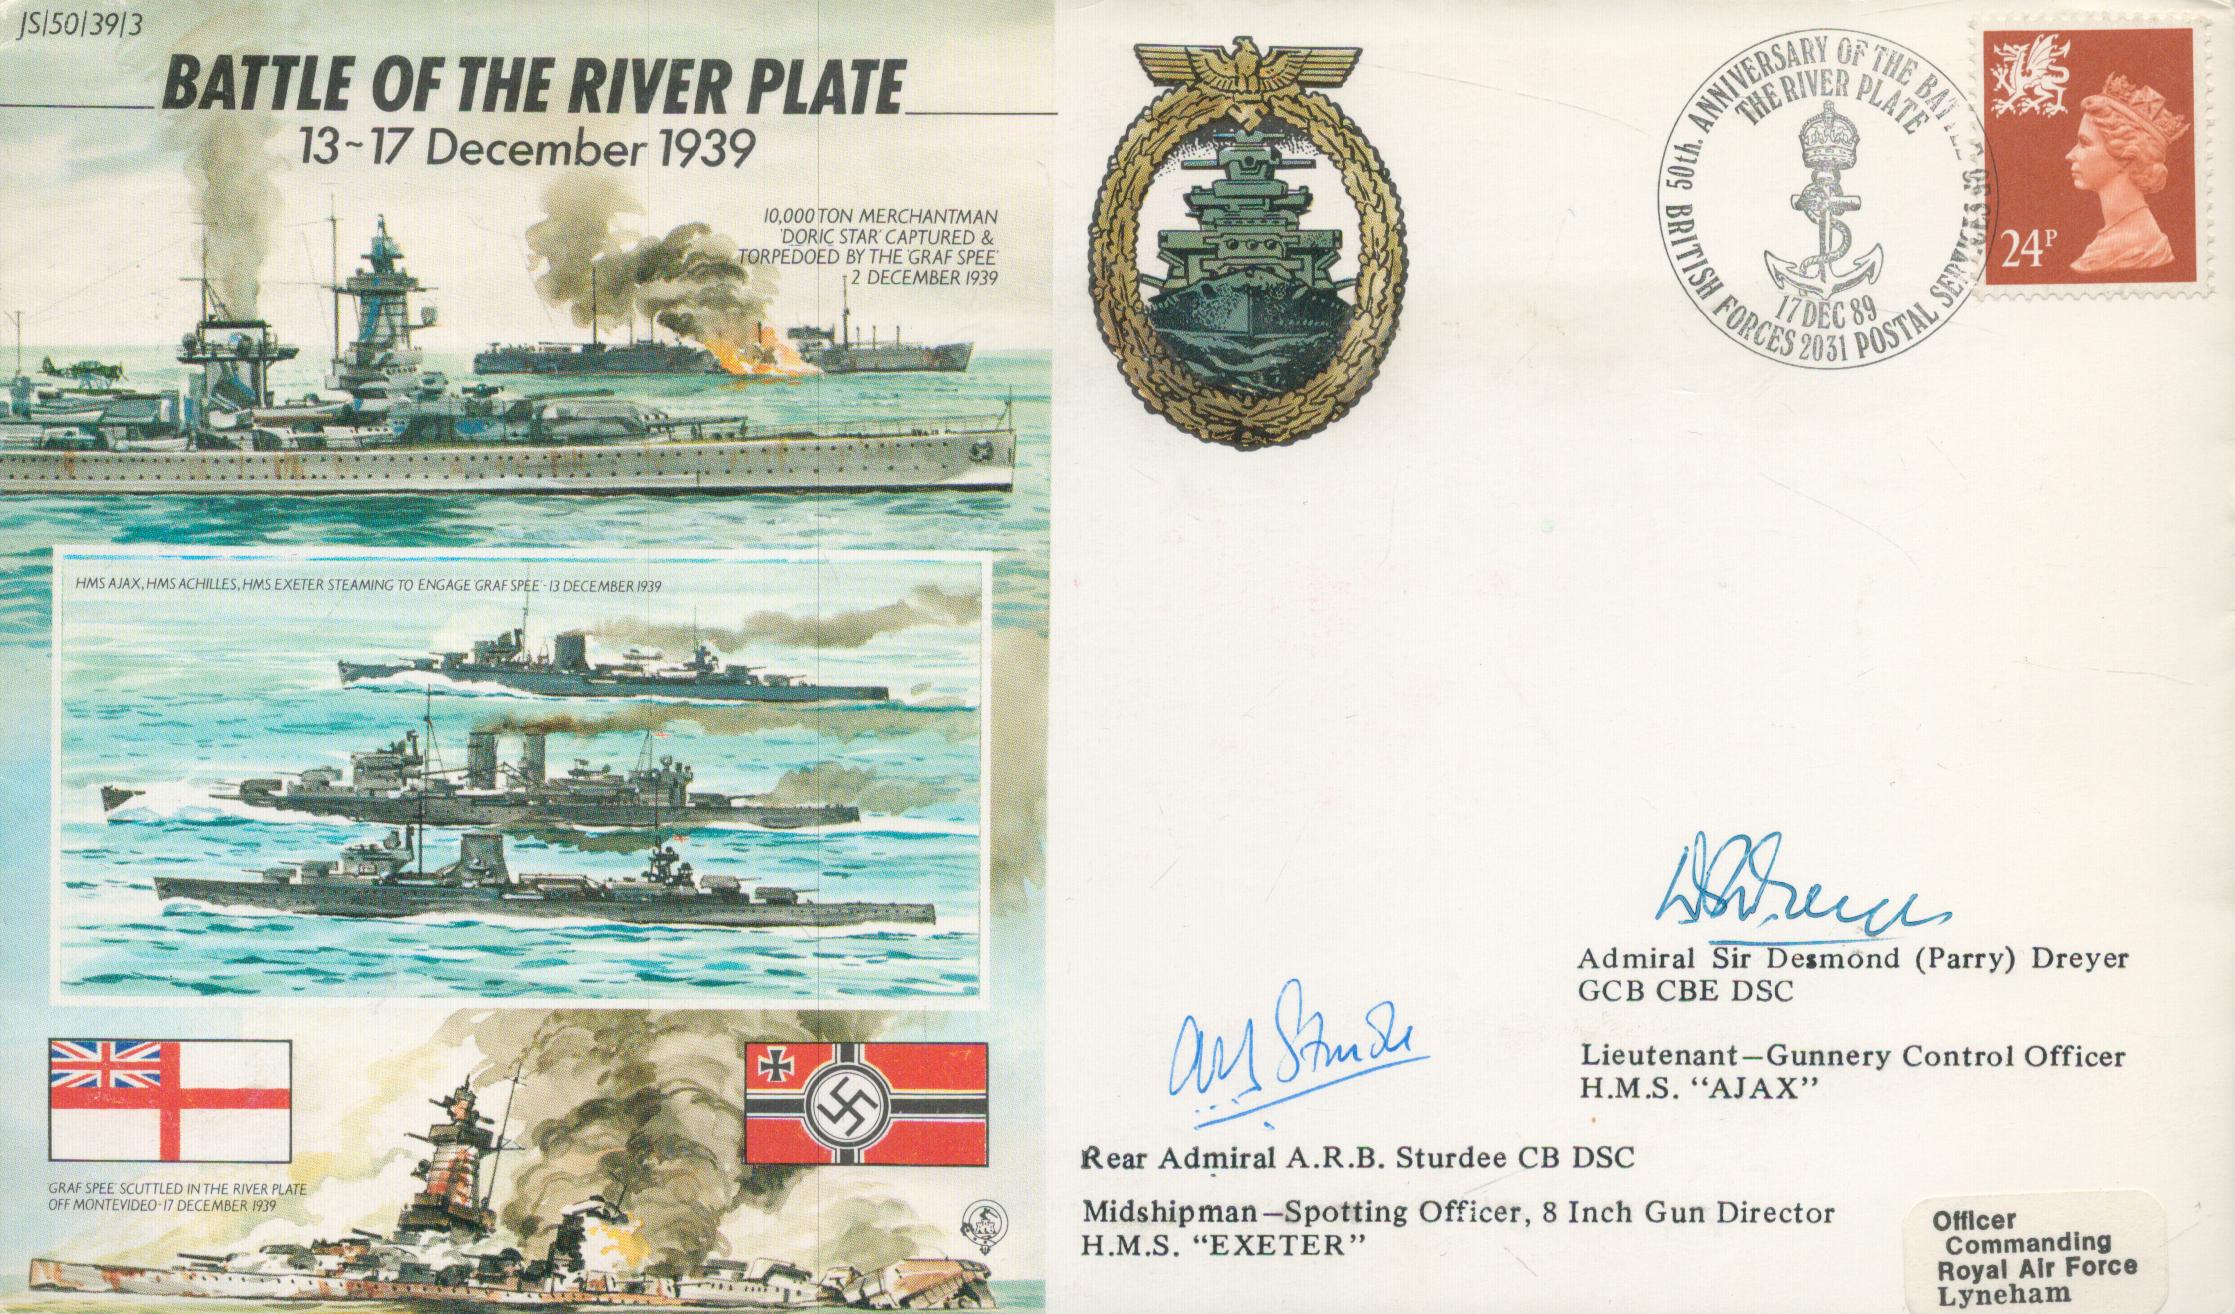 Battle of the River plate double signed 50th ann WW2 cover JS50/39/3. Signed by action veterans